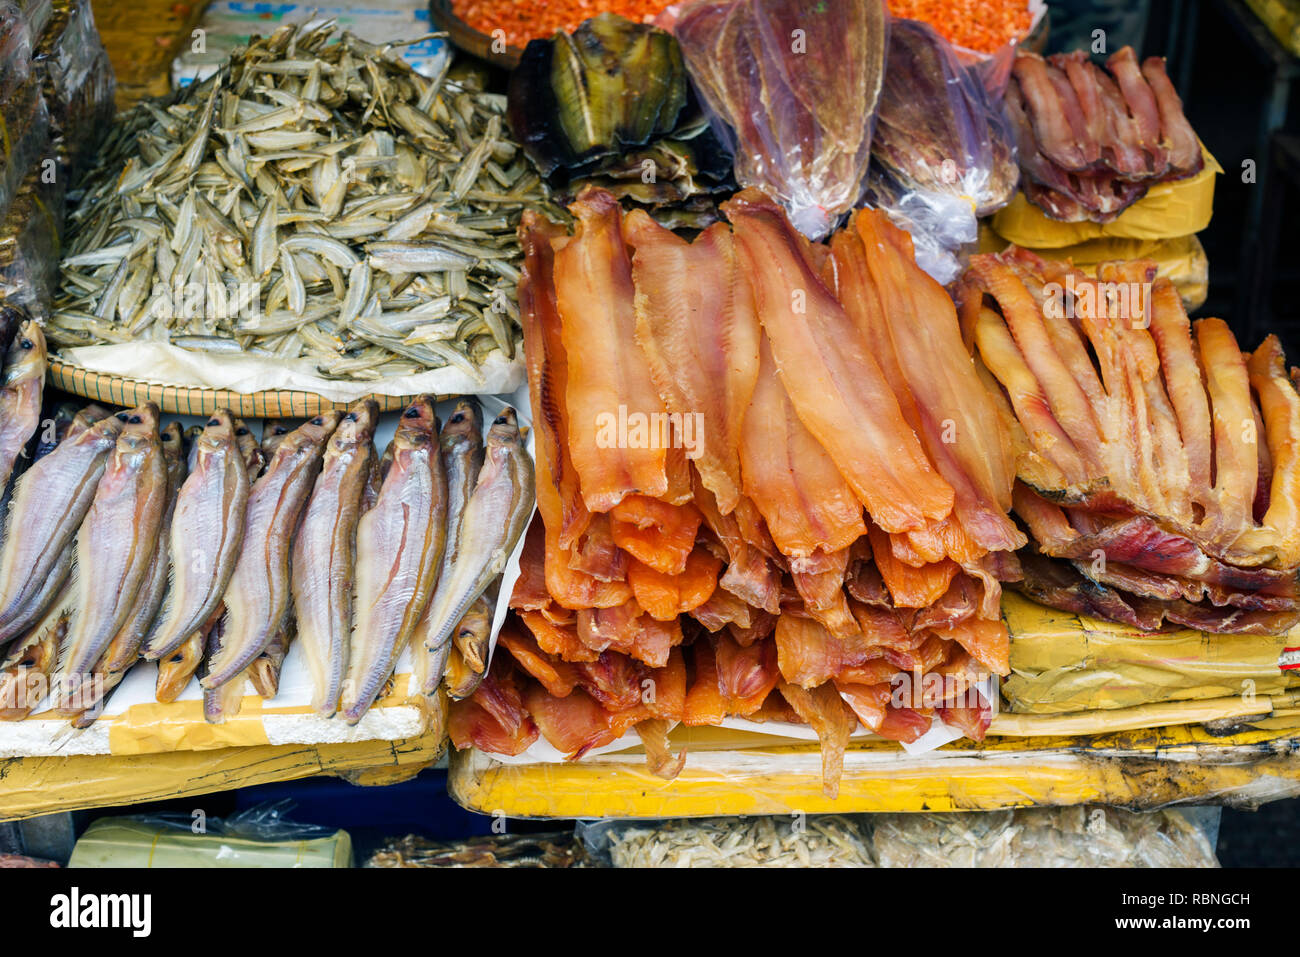 stand of dried fish in the Central Market in Phnom Penh, Cambodia Stock Photo